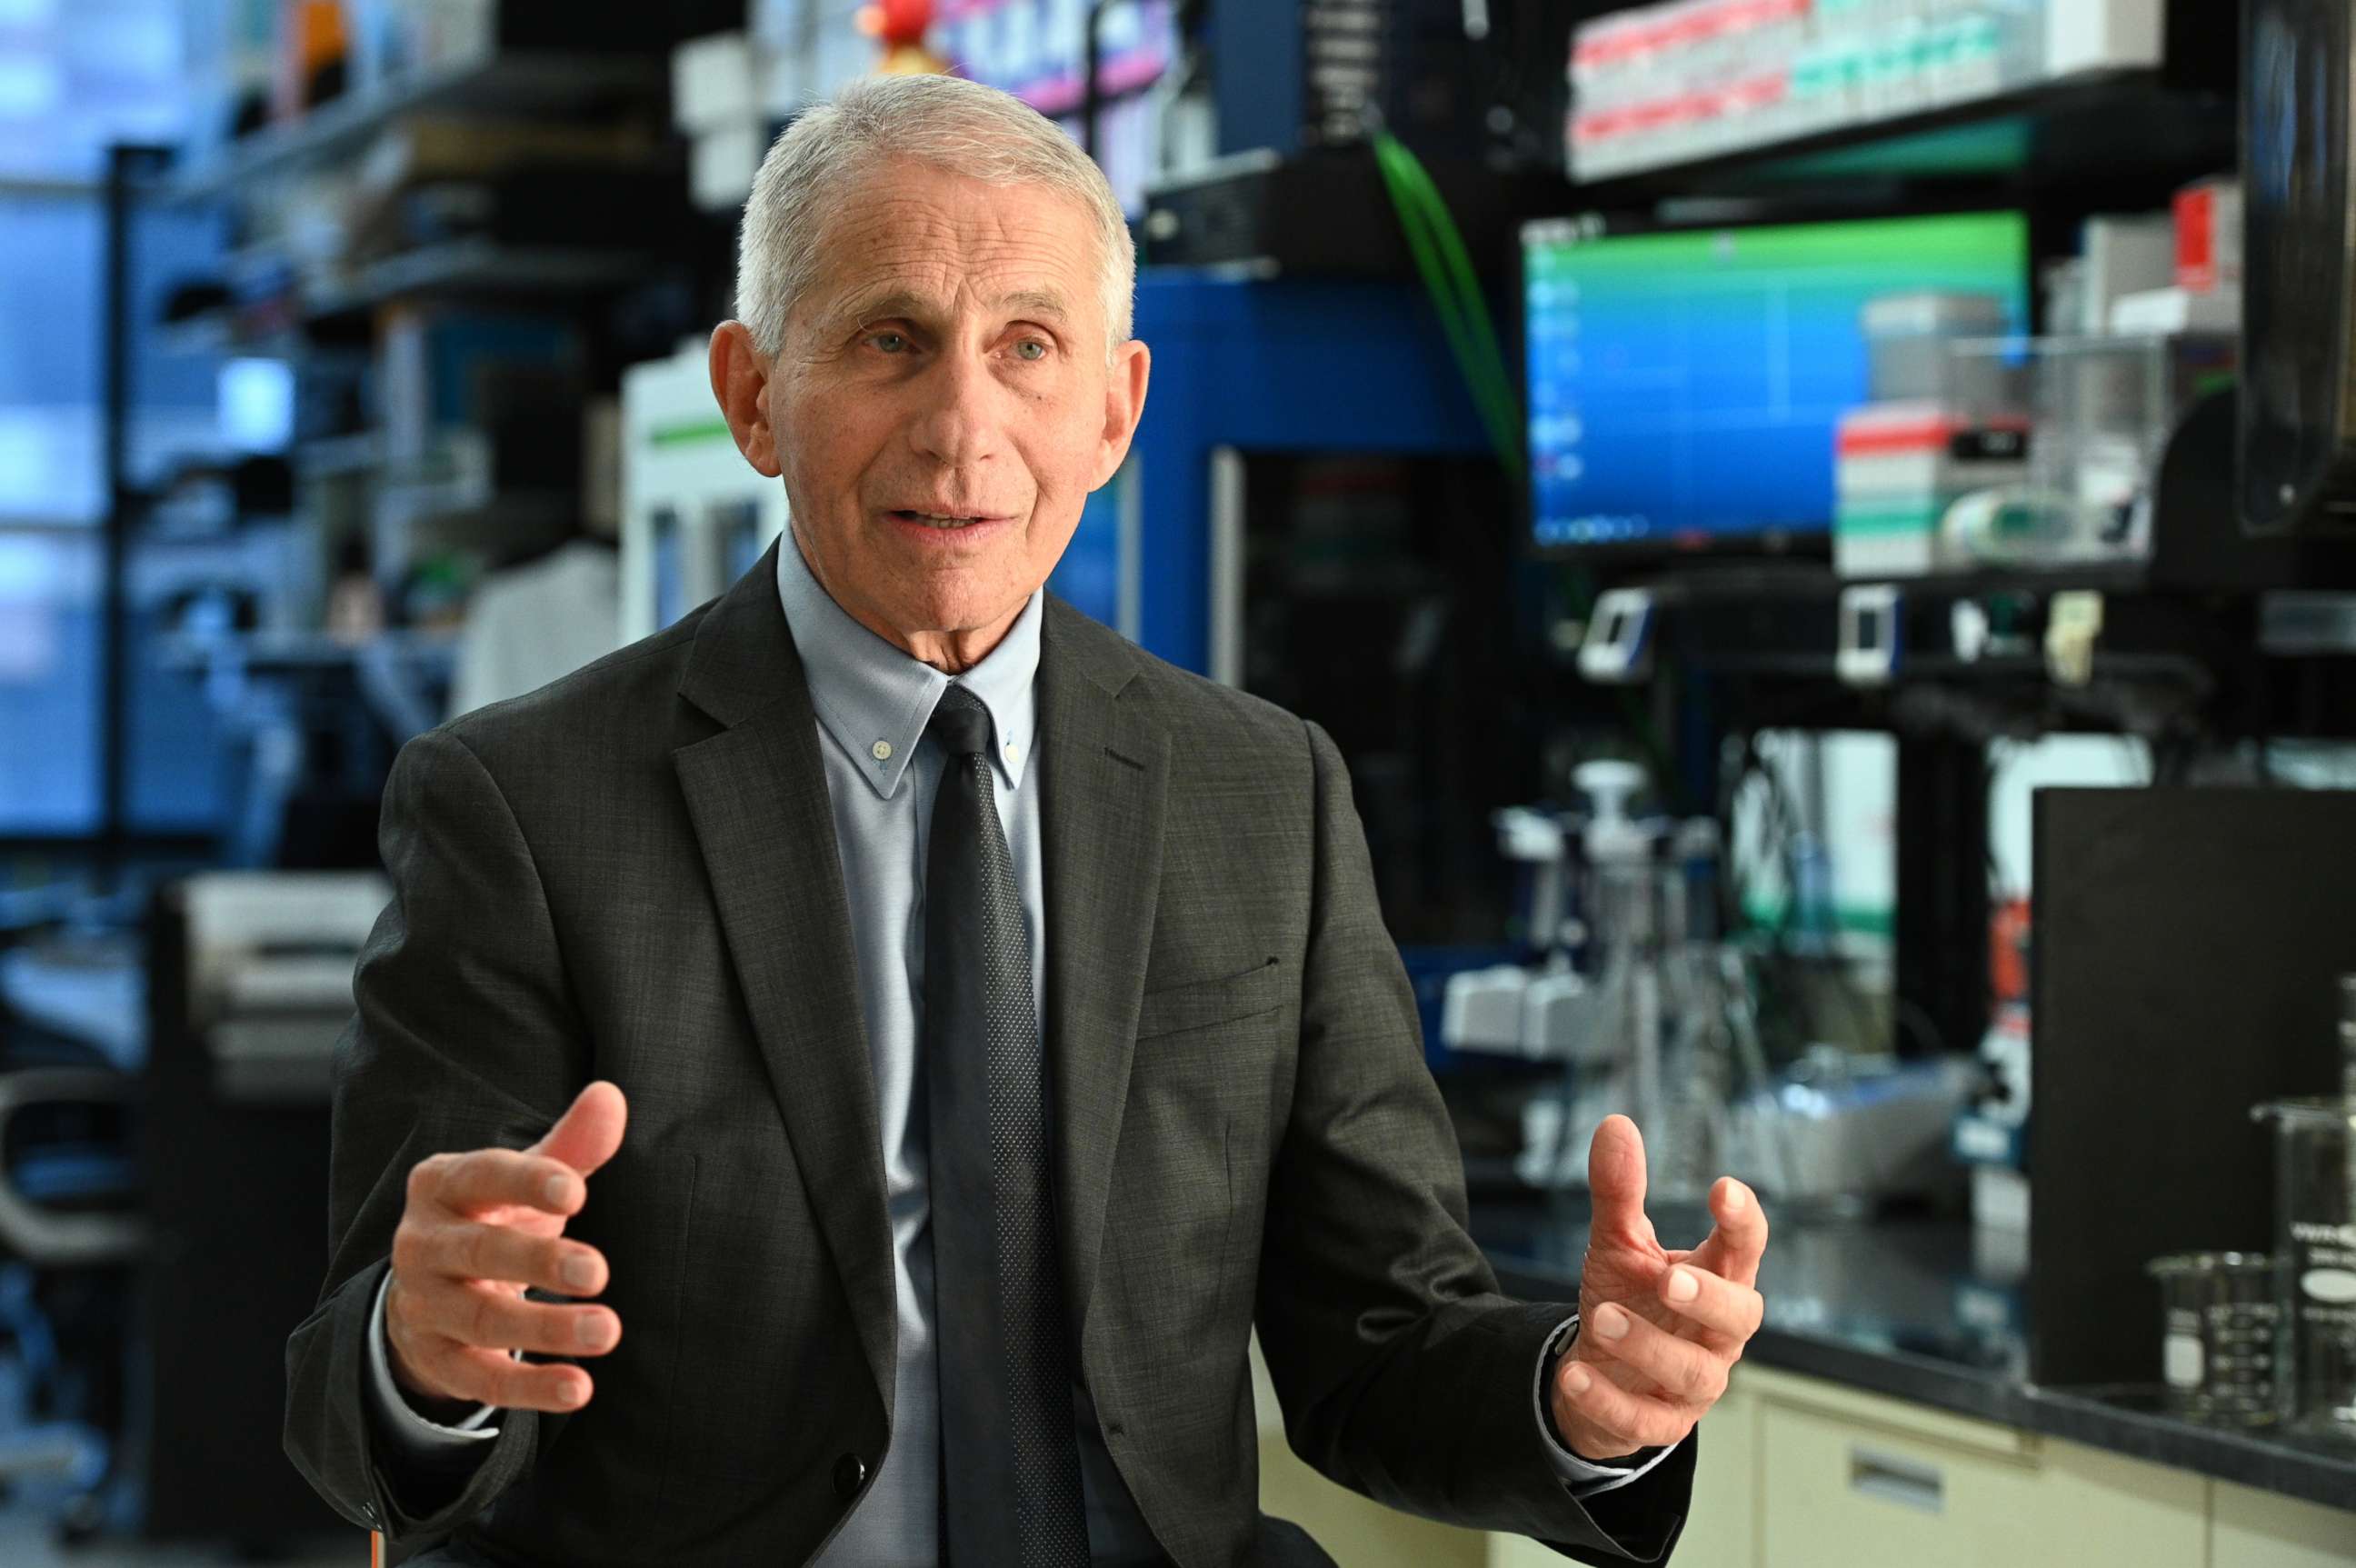 PHOTO: Dr. Anthony Fauci is interviewed by Dr. Jennifer Ashton at the National Institutes of Health in Washington.